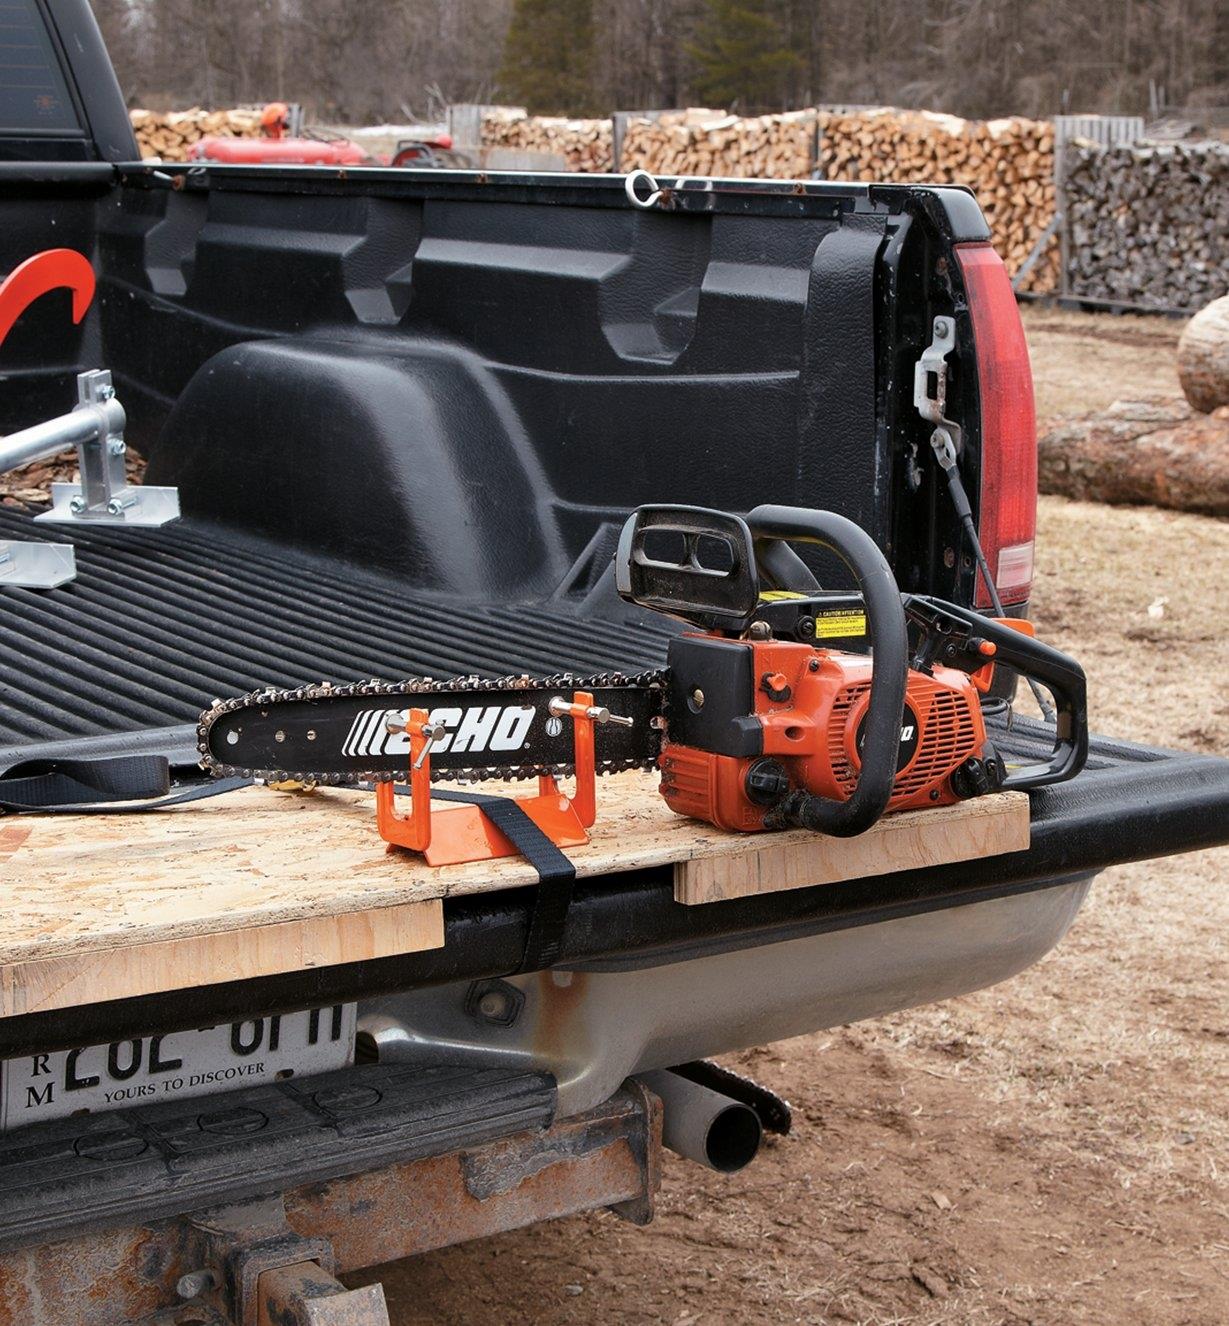 Vise clamped onto a chain-saw blade and tied to a truck tailgate with the included strap